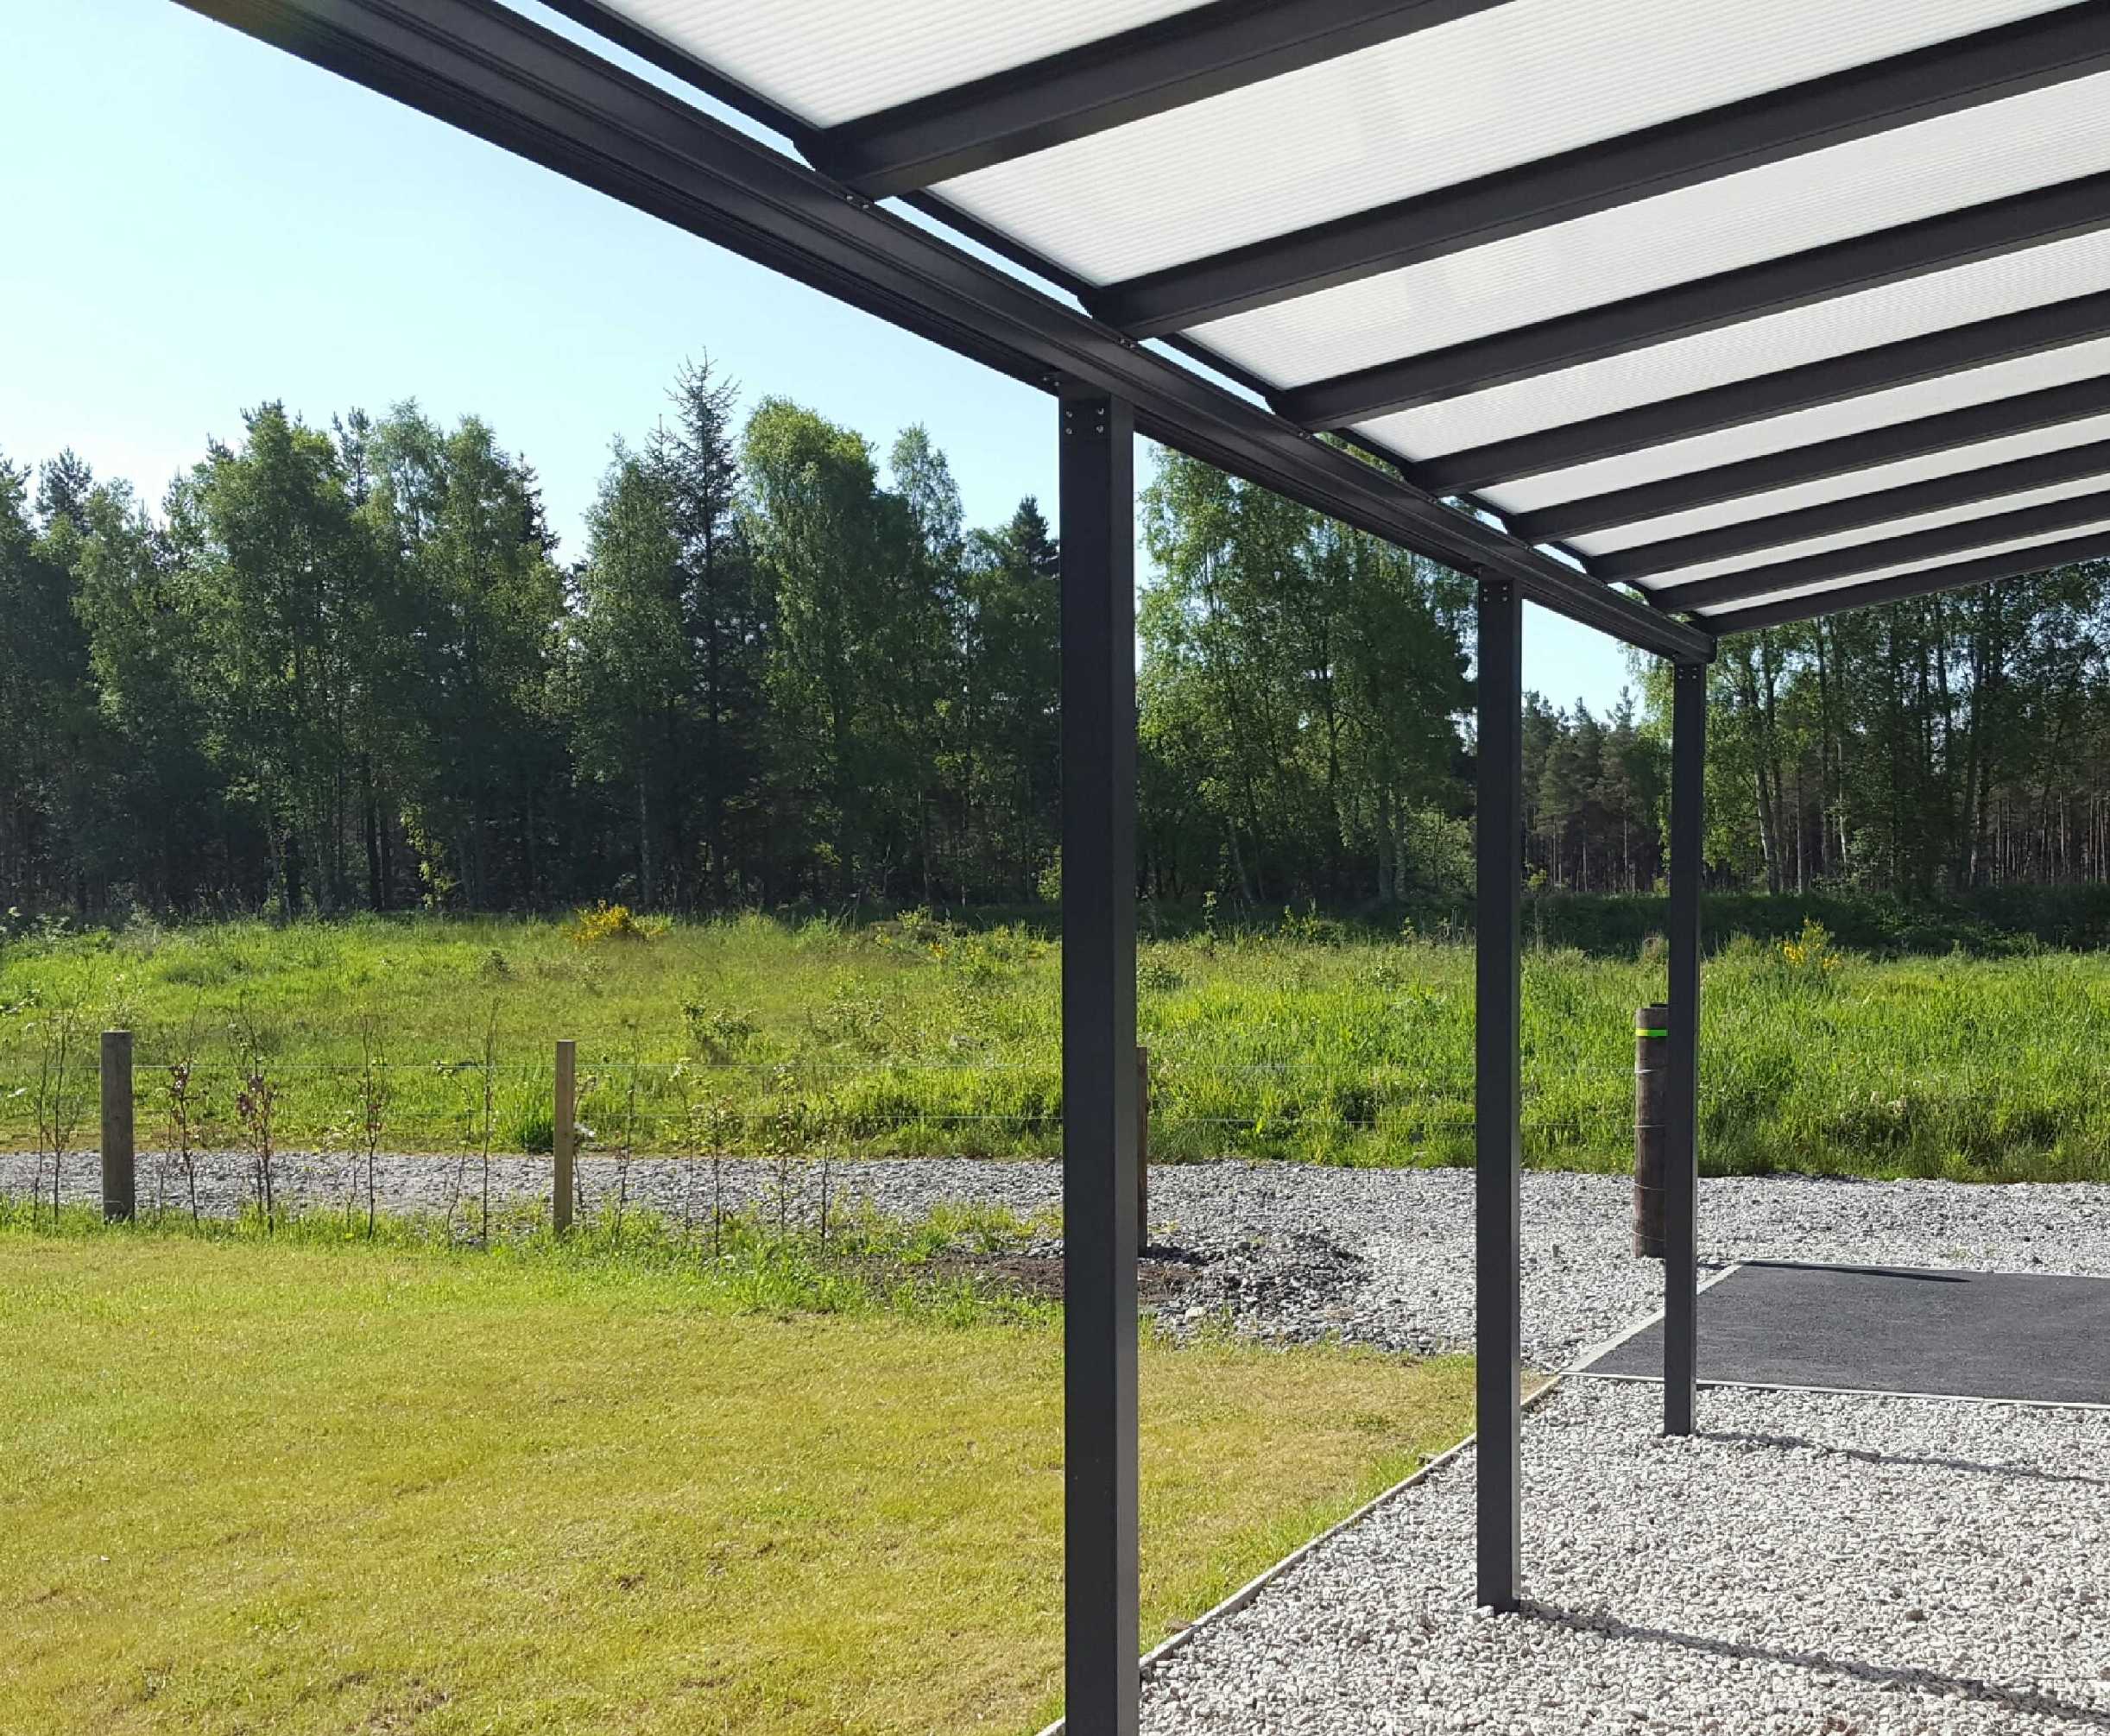 Omega Smart Lean-To Canopy, Anthracite Grey, 6mm Glass Clear Plate Polycarbonate Glazing - 2.1m (W) x 3.5m (P), (2) Supporting Posts